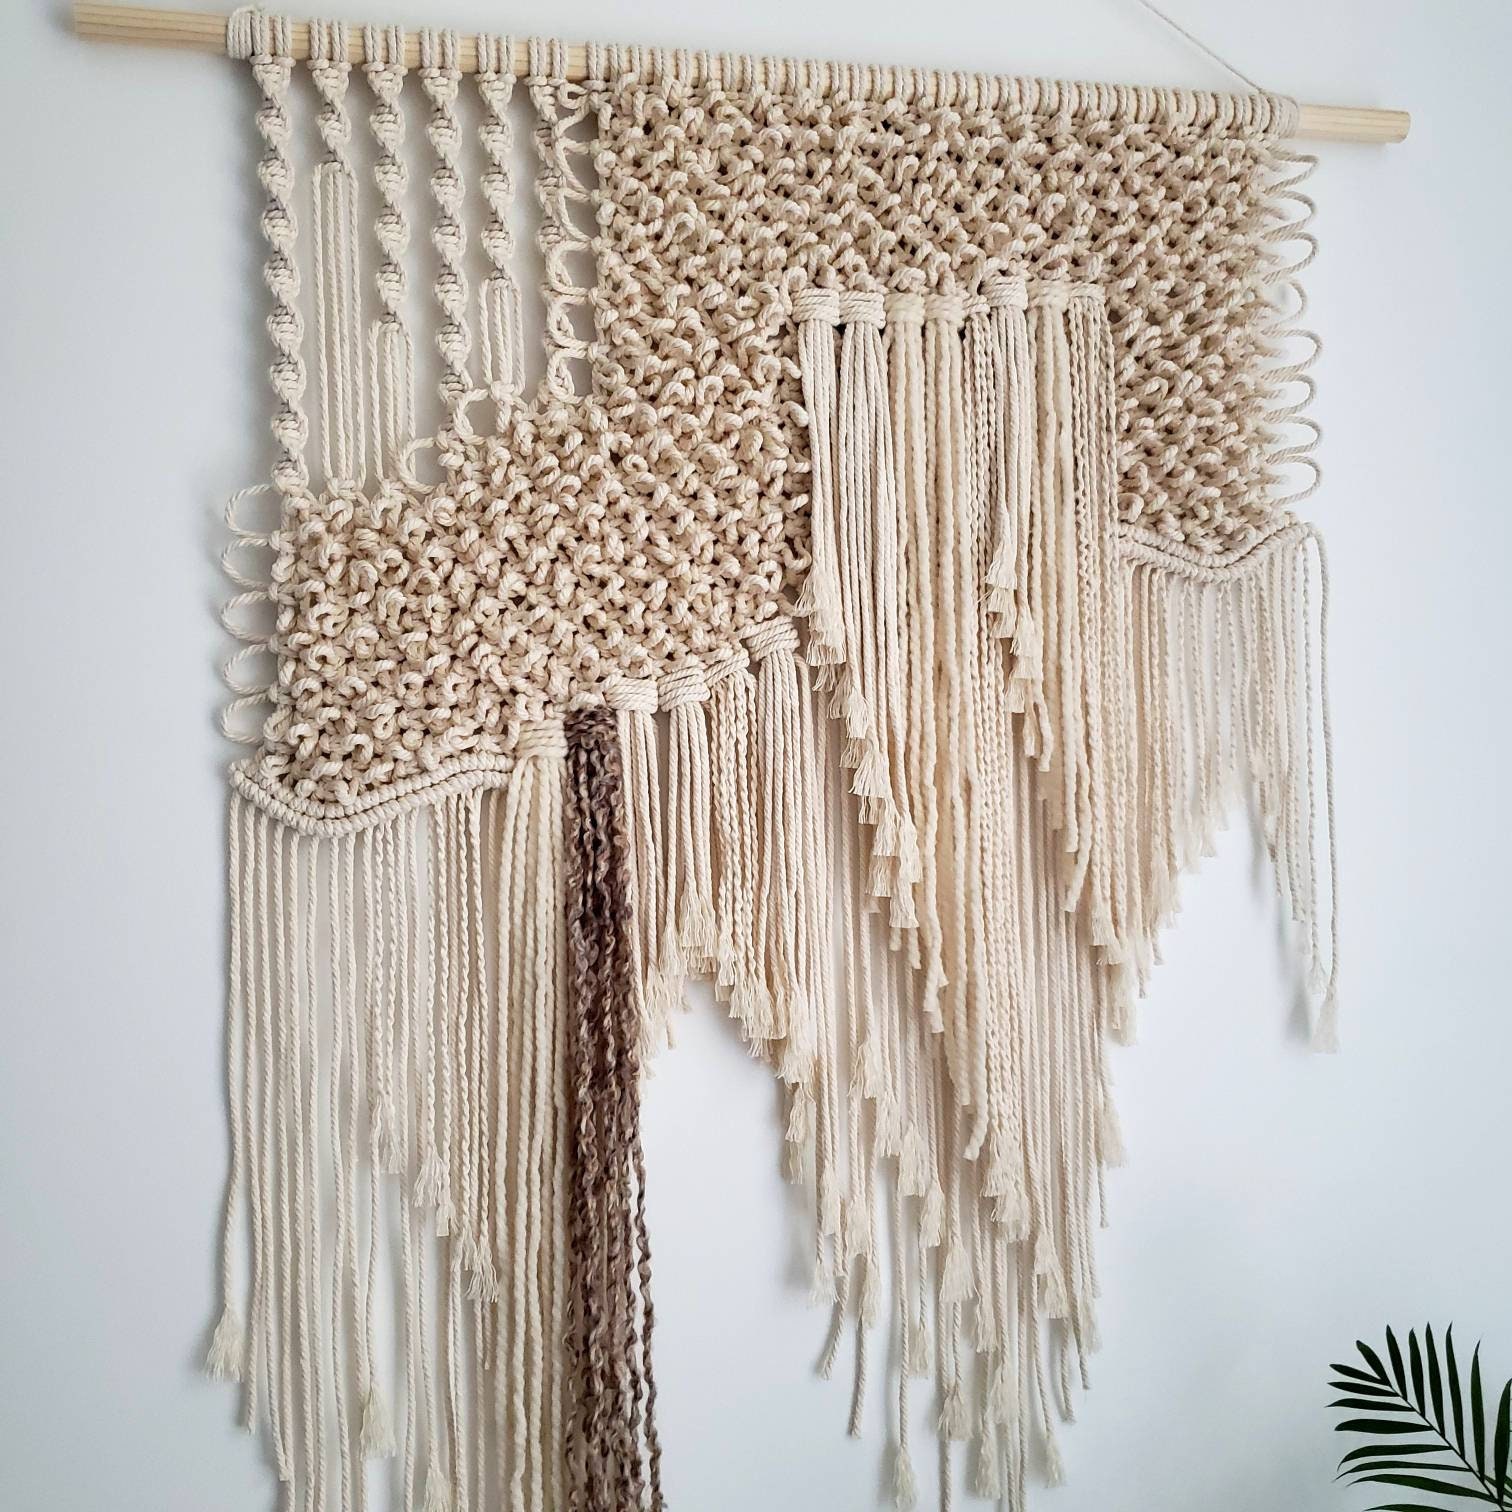 Abstract Large Macrame Wall Hanging The Macrame Deco | Etsy